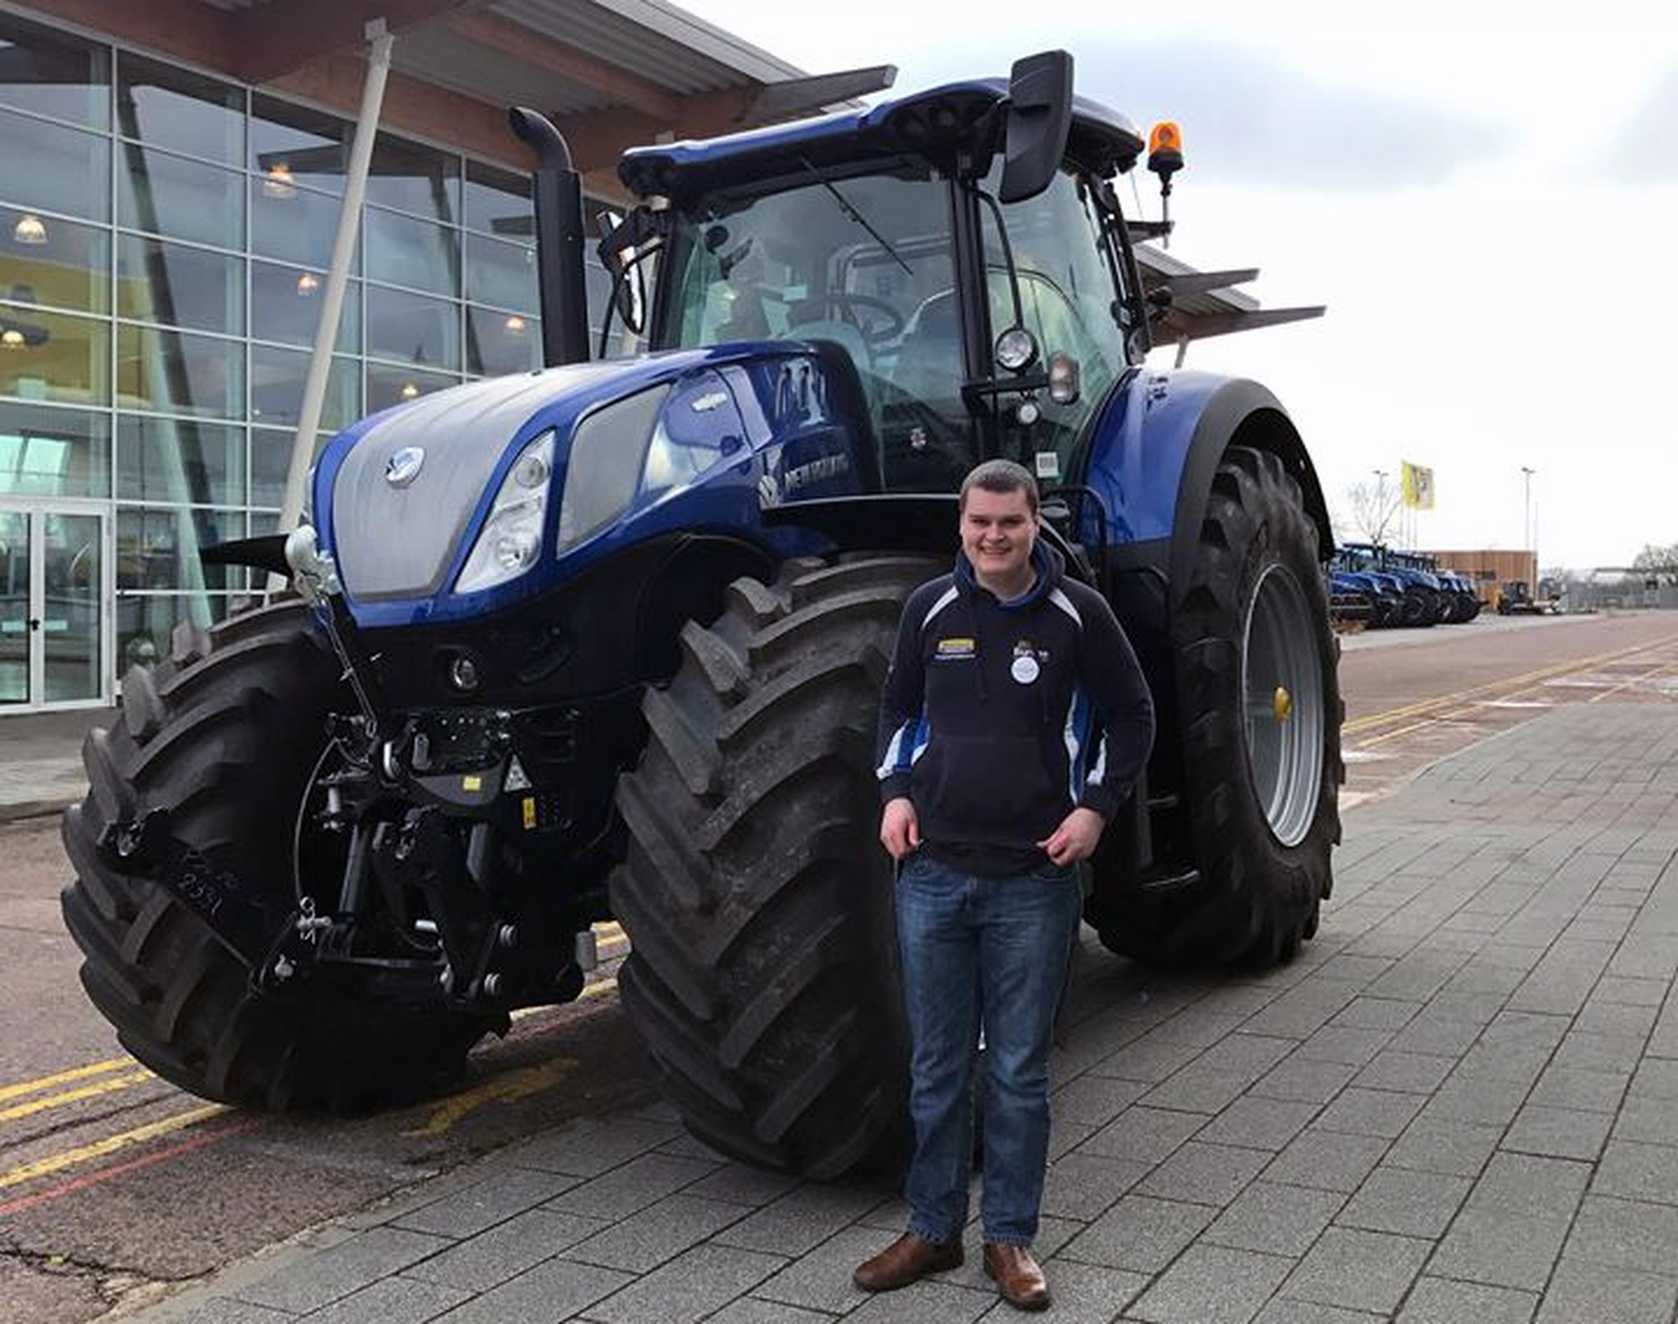 James stood in front of big blue tractor smiling